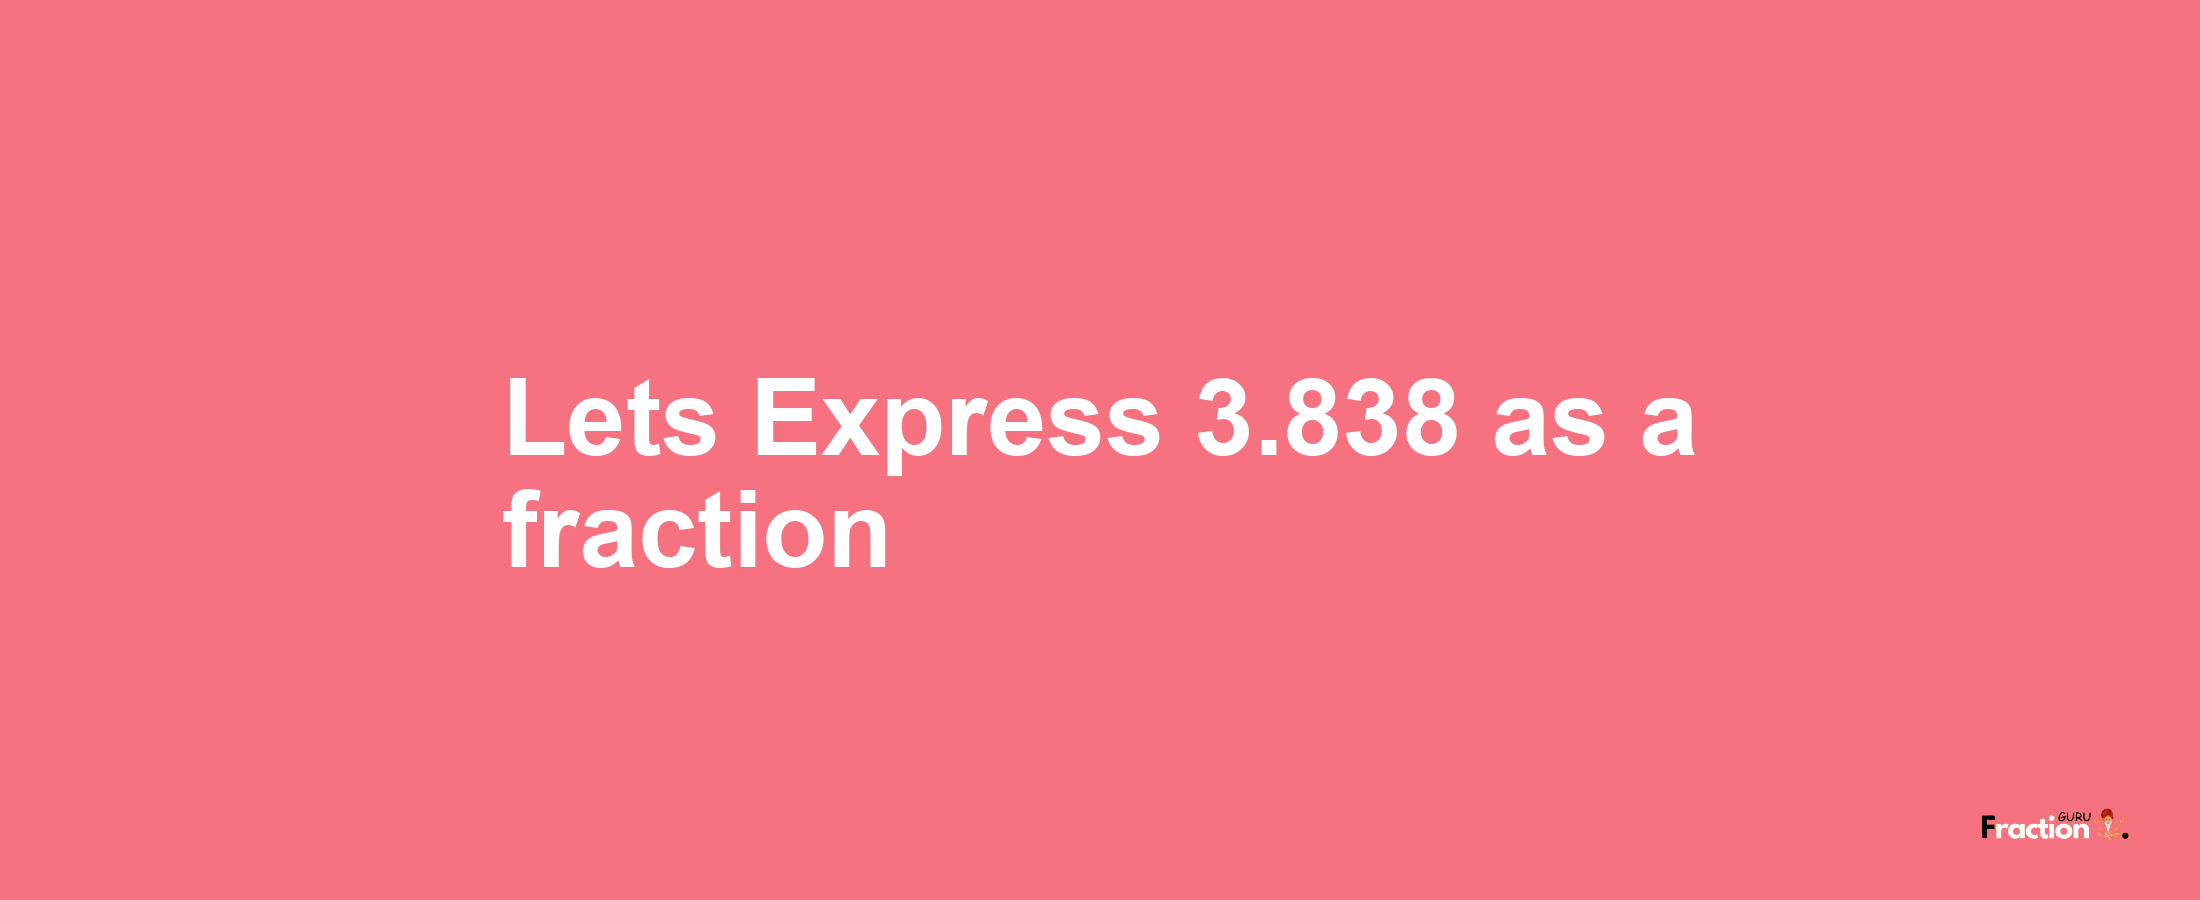 Lets Express 3.838 as afraction